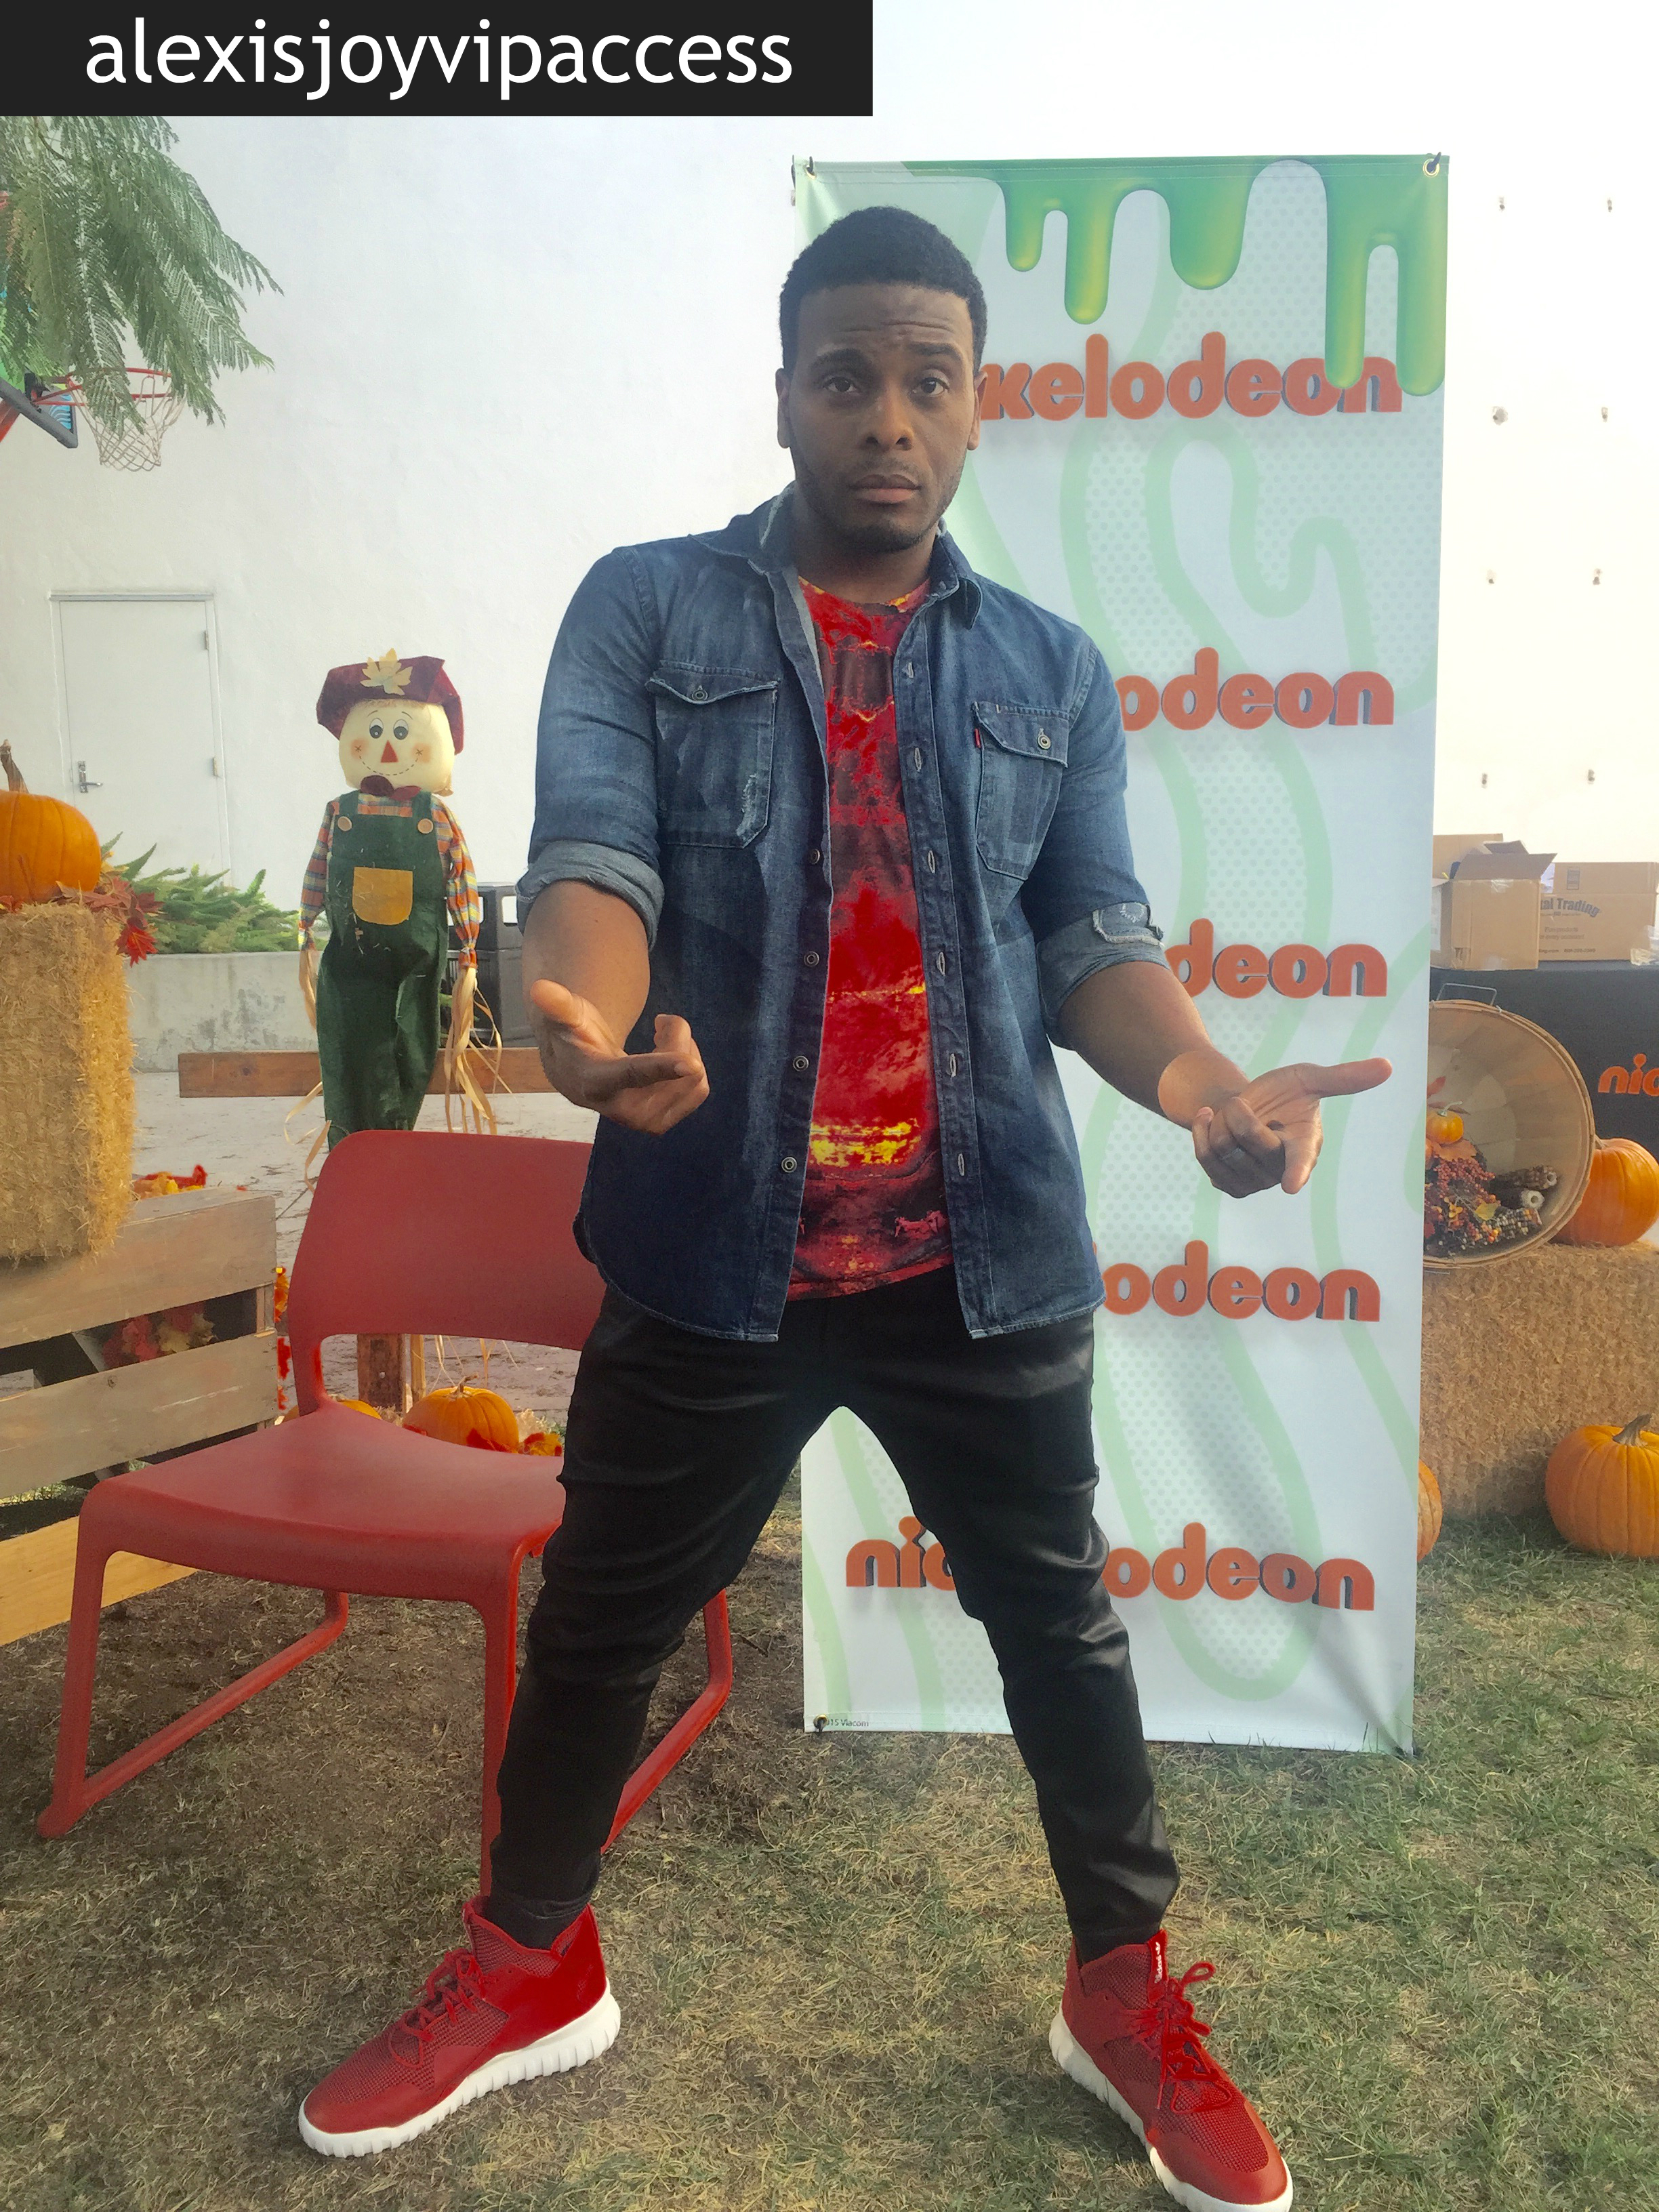 Vipaccessexclusive Game Shakers Star Kel Mitchell Interview With Alexisjoyvipaccess At Nickelodeon S Halloween Event Alexisjoyvipaccess